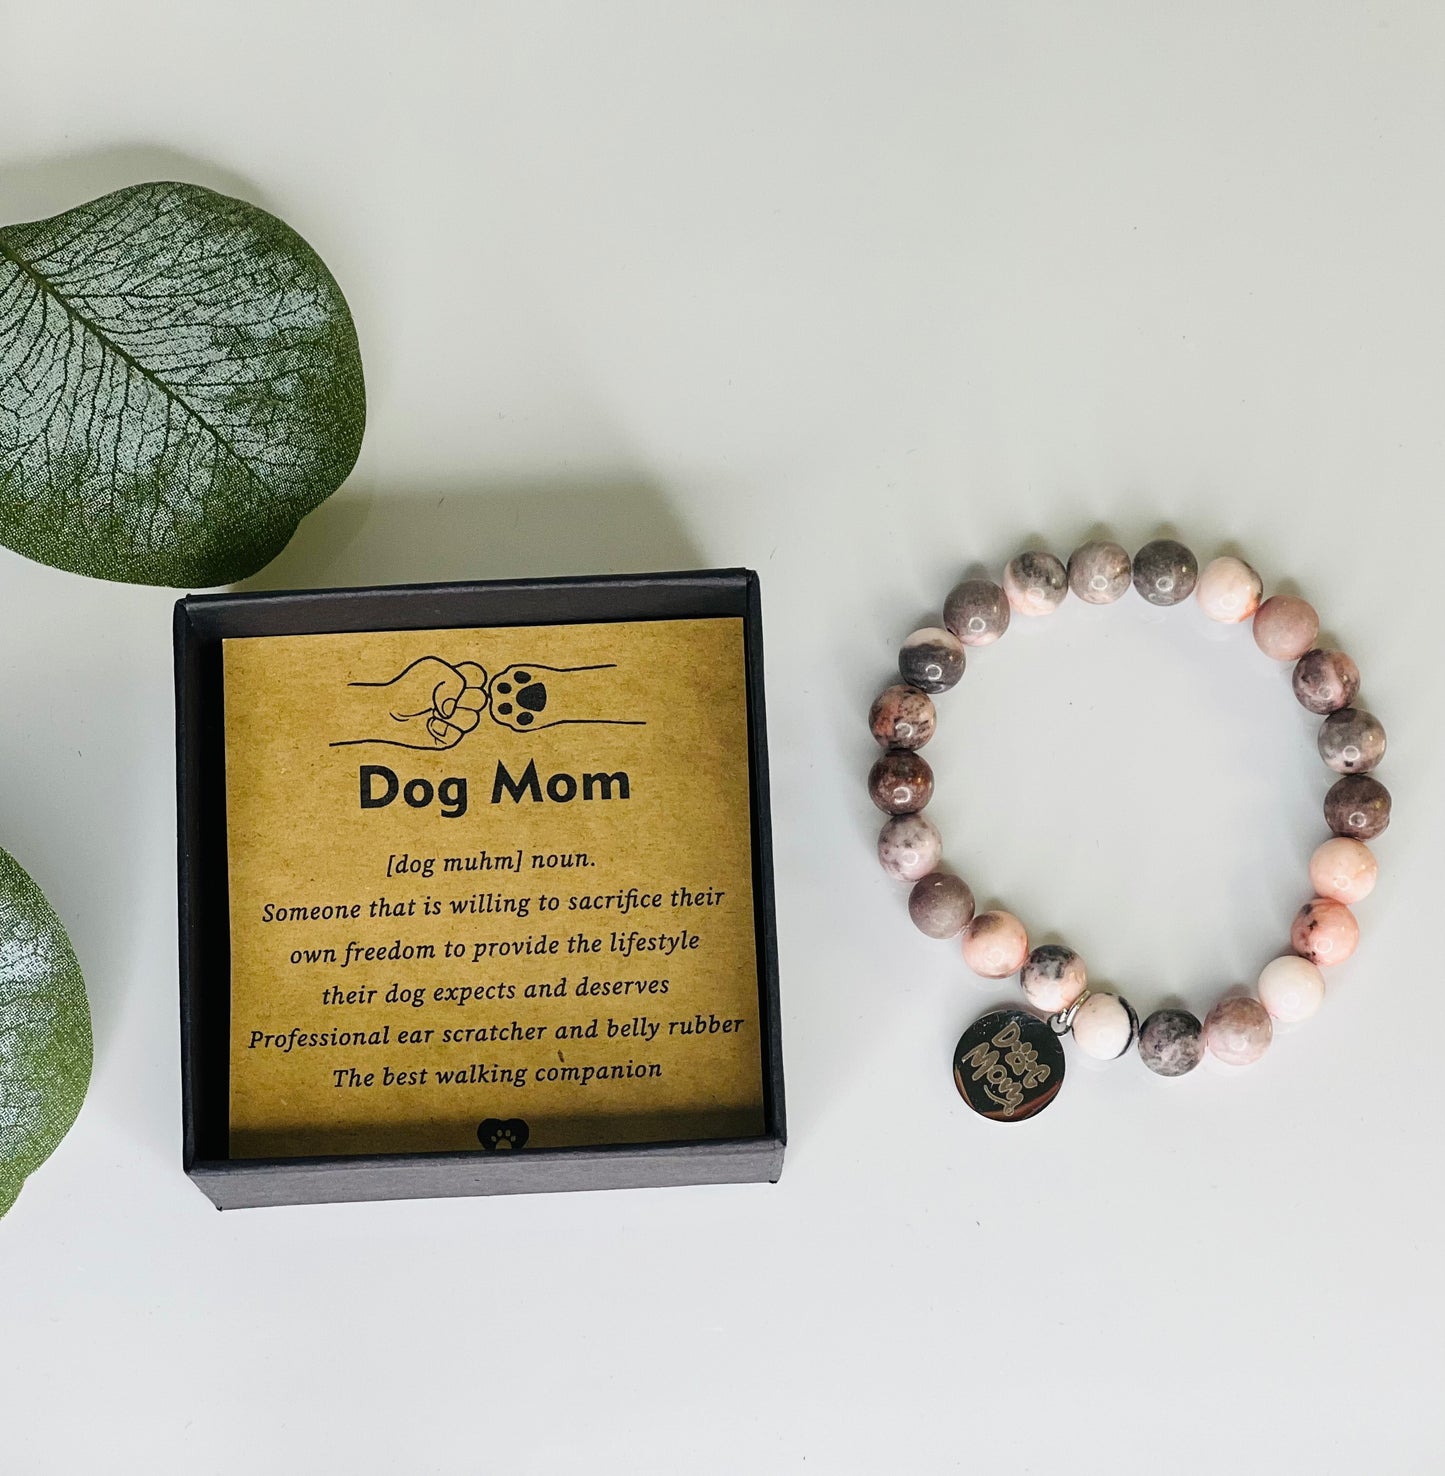 Dog Mom Natural Stone Bead Bracelet with Pendant and Card